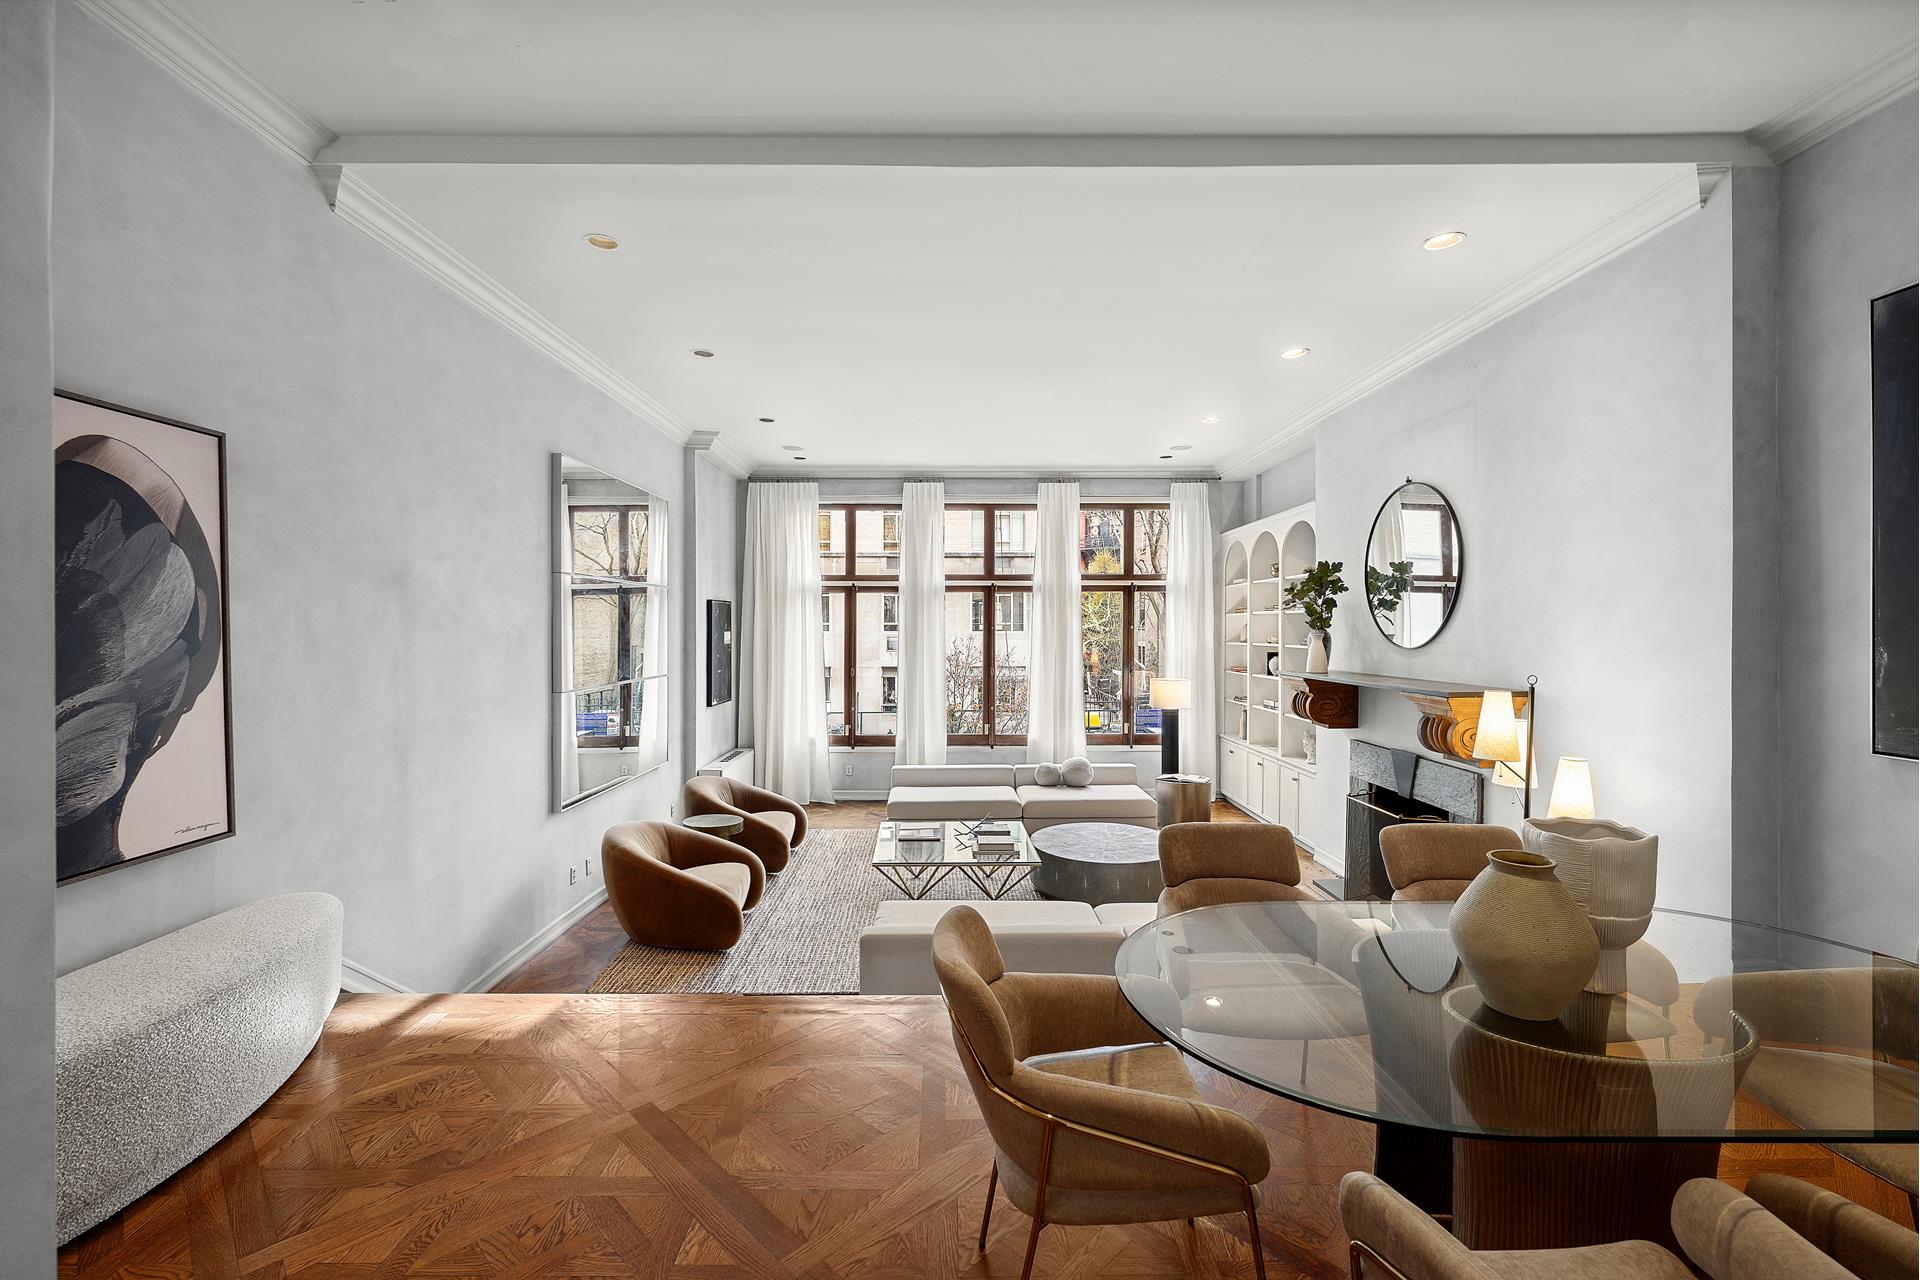 6 East 68th Street 2, Lenox Hill, Upper East Side, NYC - 2 Bedrooms  
2 Bathrooms  
5 Rooms - 